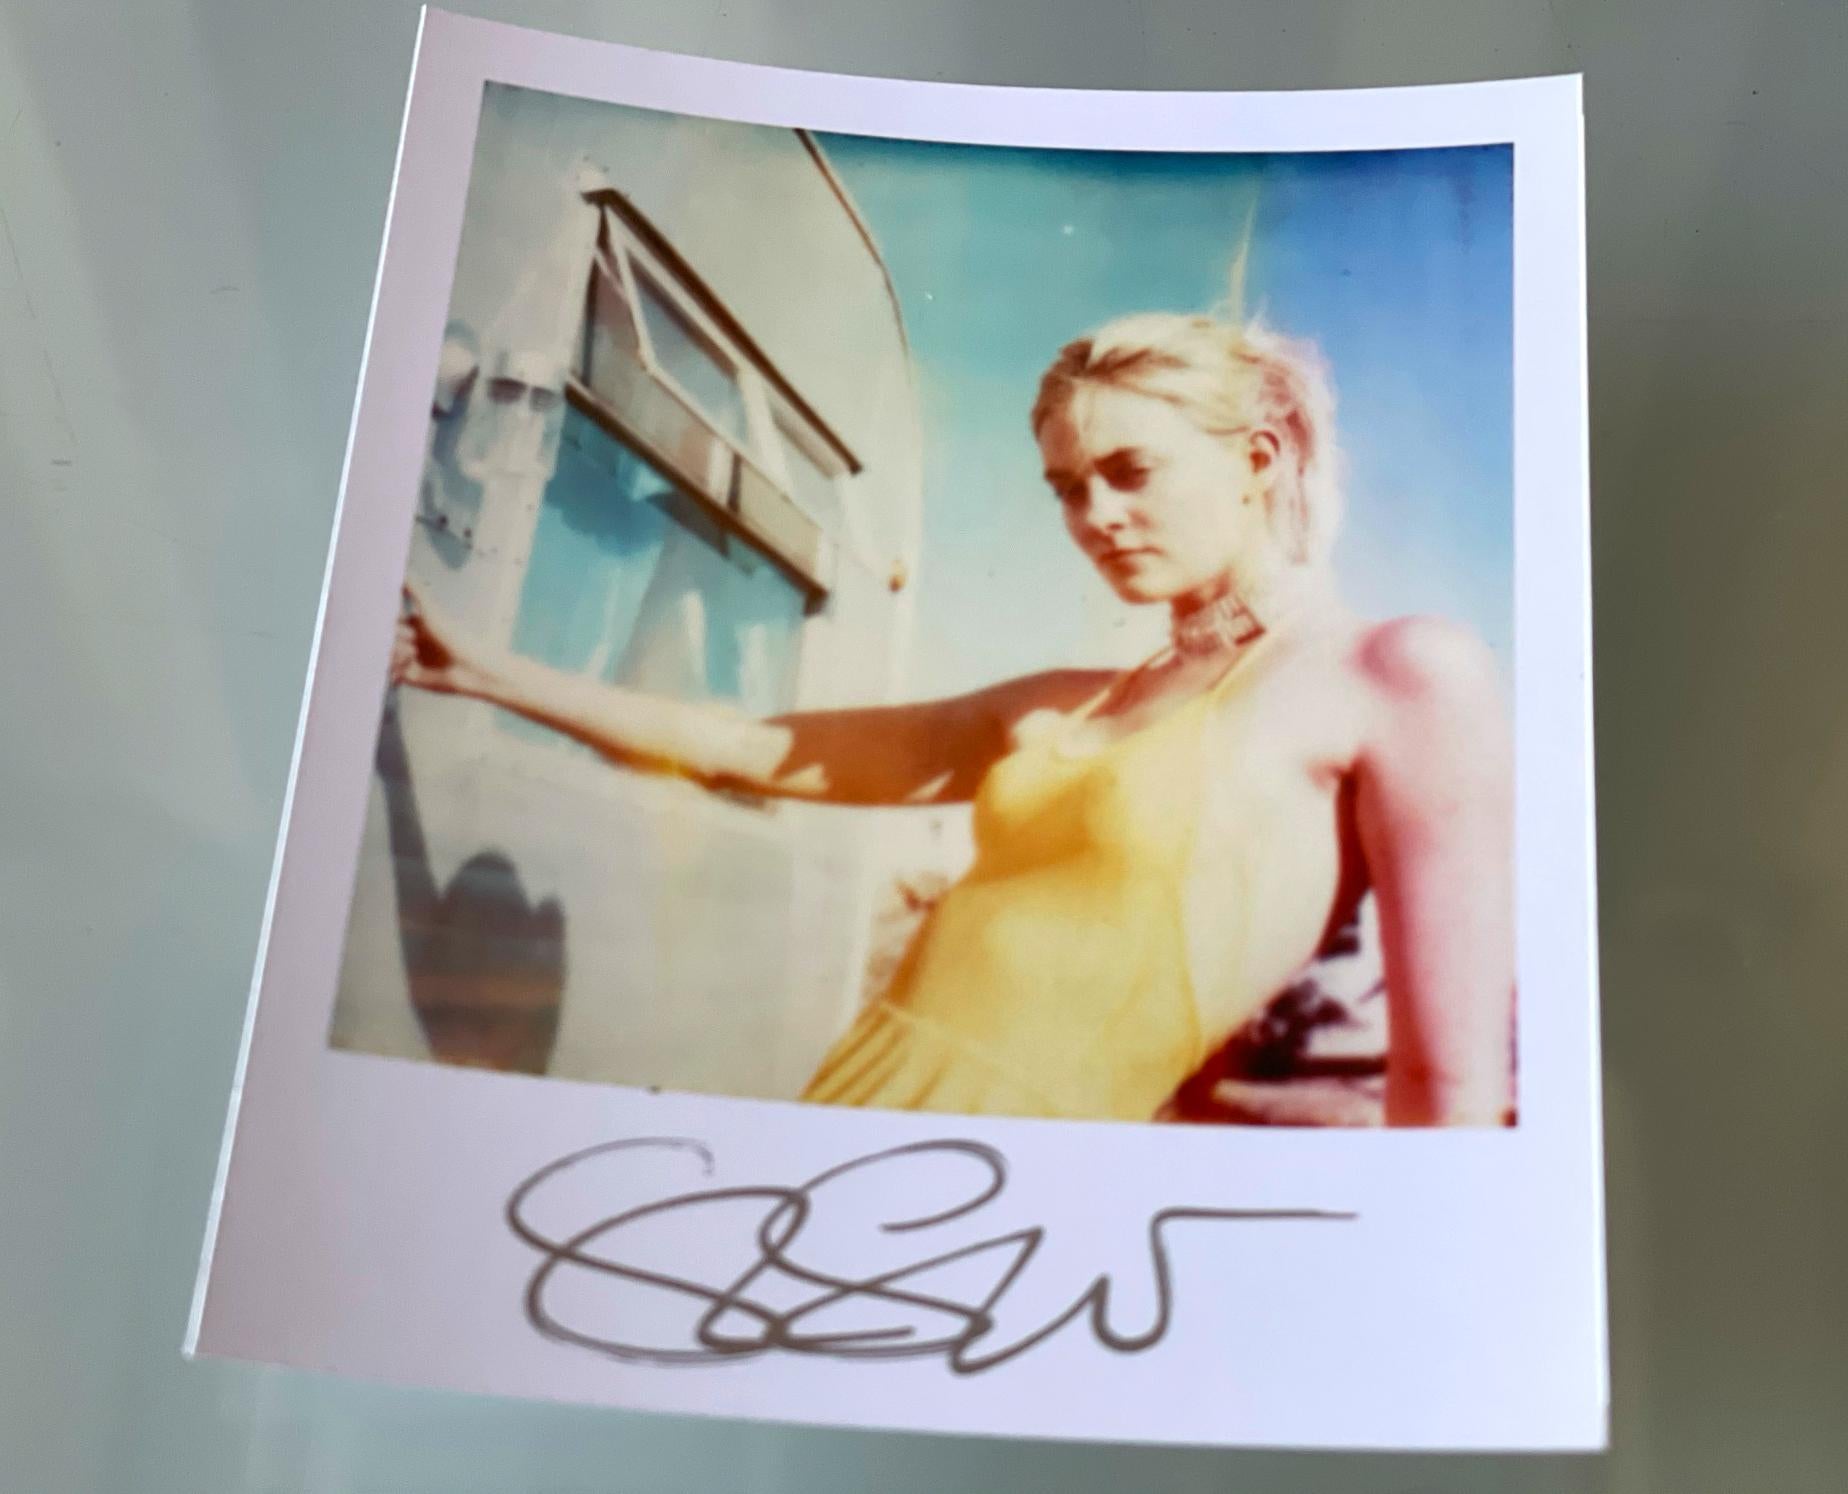 Stefanie Schneider's Mini
Caitlin aka Jane Bond (Heavenly Falls) -

signed in front, not mounted. 
Digital Color Photographs based on a Polaroid. 

Polaroid sized open Editions 1999-2013
10.7 x 8.8cm (Image 7.9x7.7cm)

Included is a signed